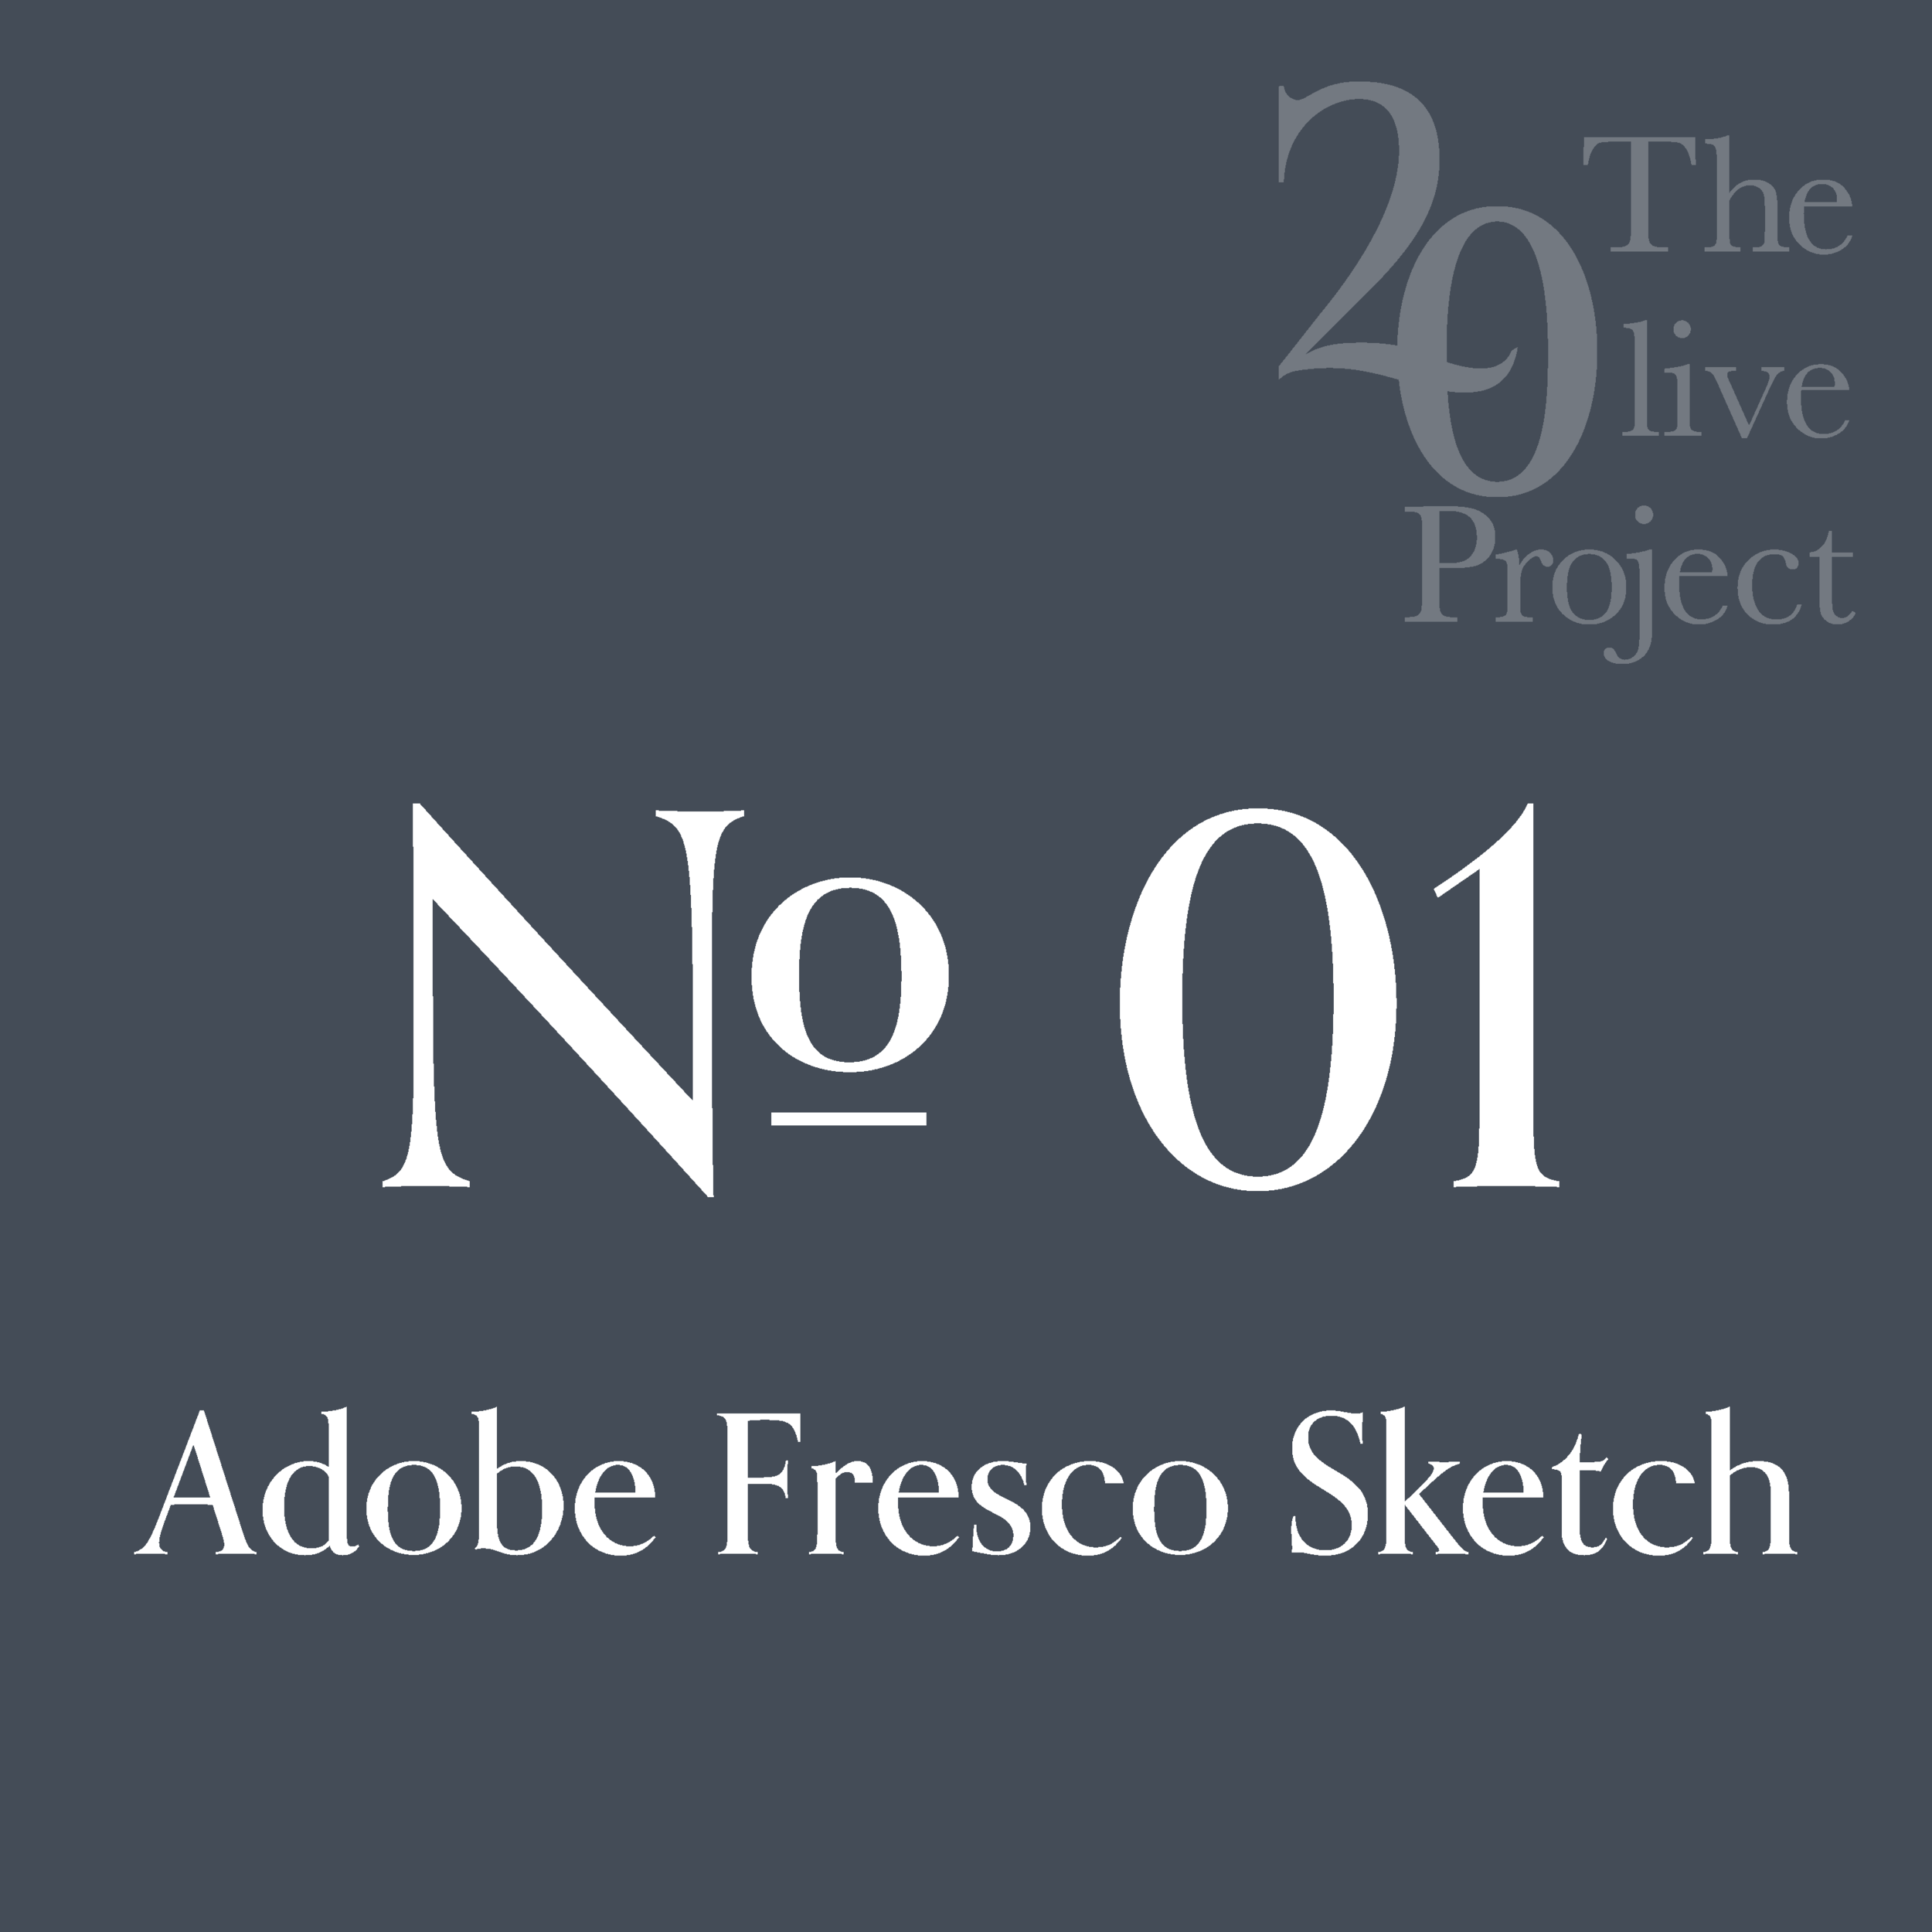 the-olive-project-logos-final_Artboard 32-Project1-fresco_Artboard 32-Project1_Artboard 32-Project1.png